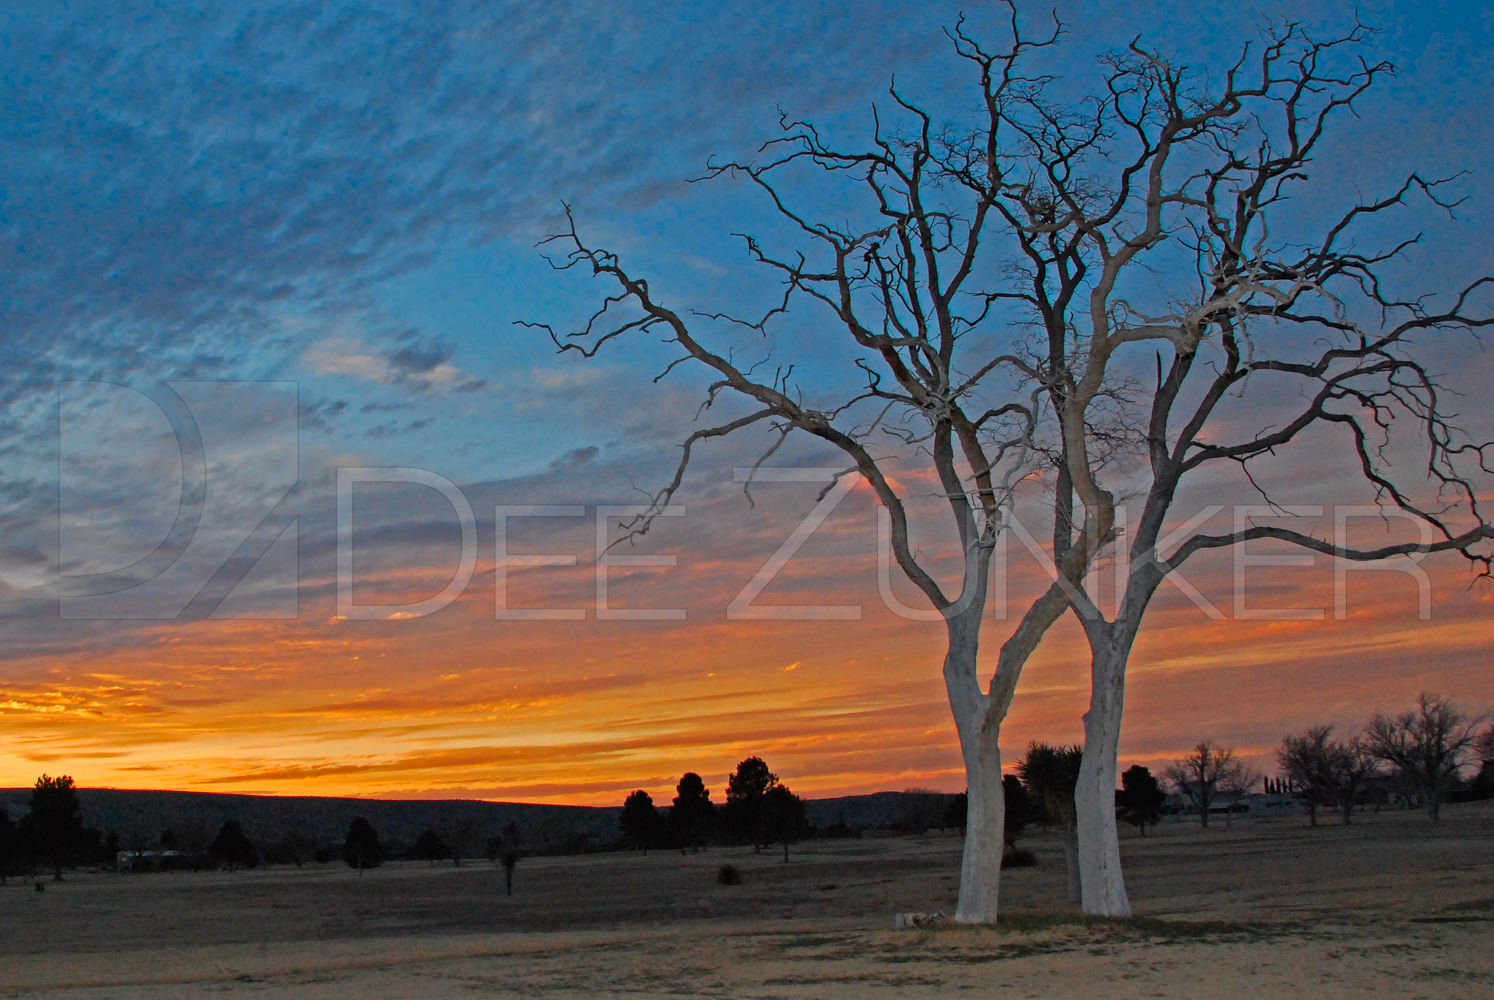 Two Trees in a New Mexico Sunset by Houston Commercial Architectural Photographer Dee Zunker